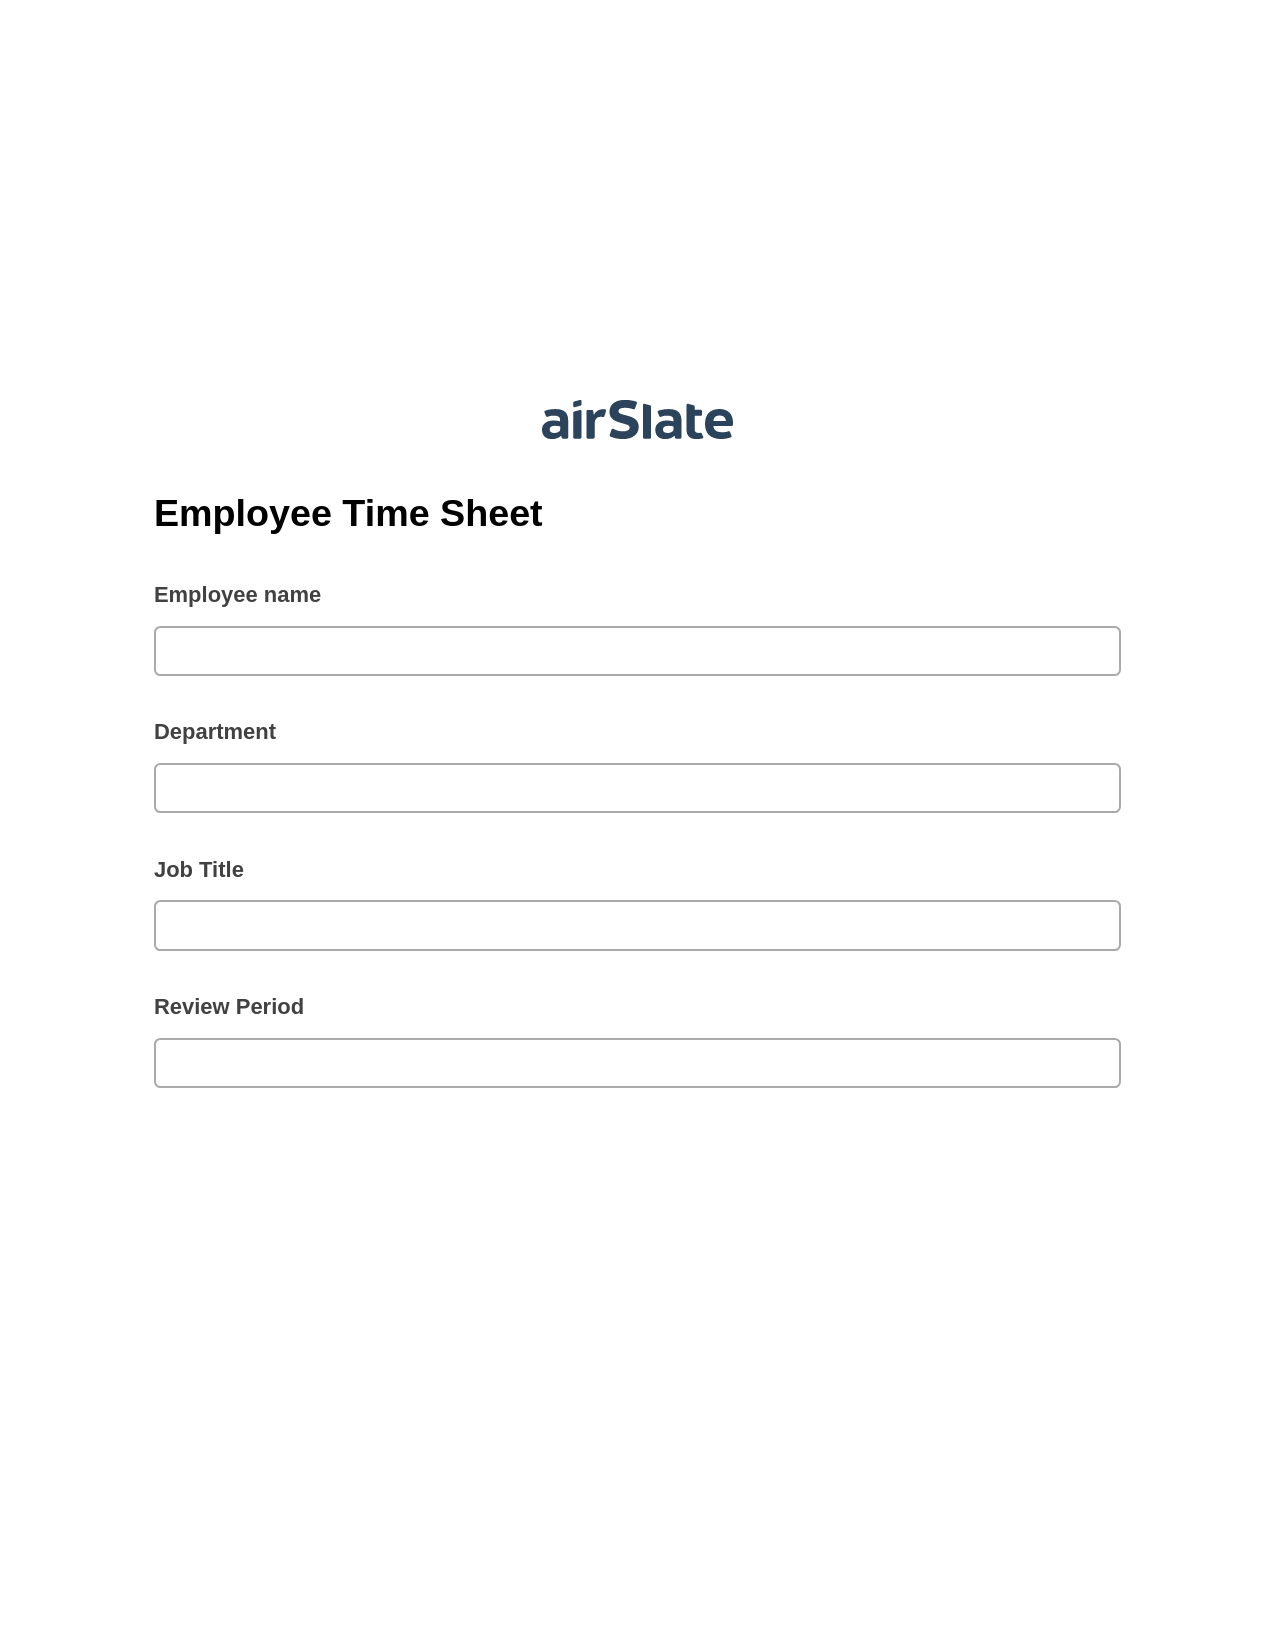 Employee Time Sheet Pre-fill from another Slate Bot, Update Audit Trail Bot, Archive to SharePoint Folder Bot